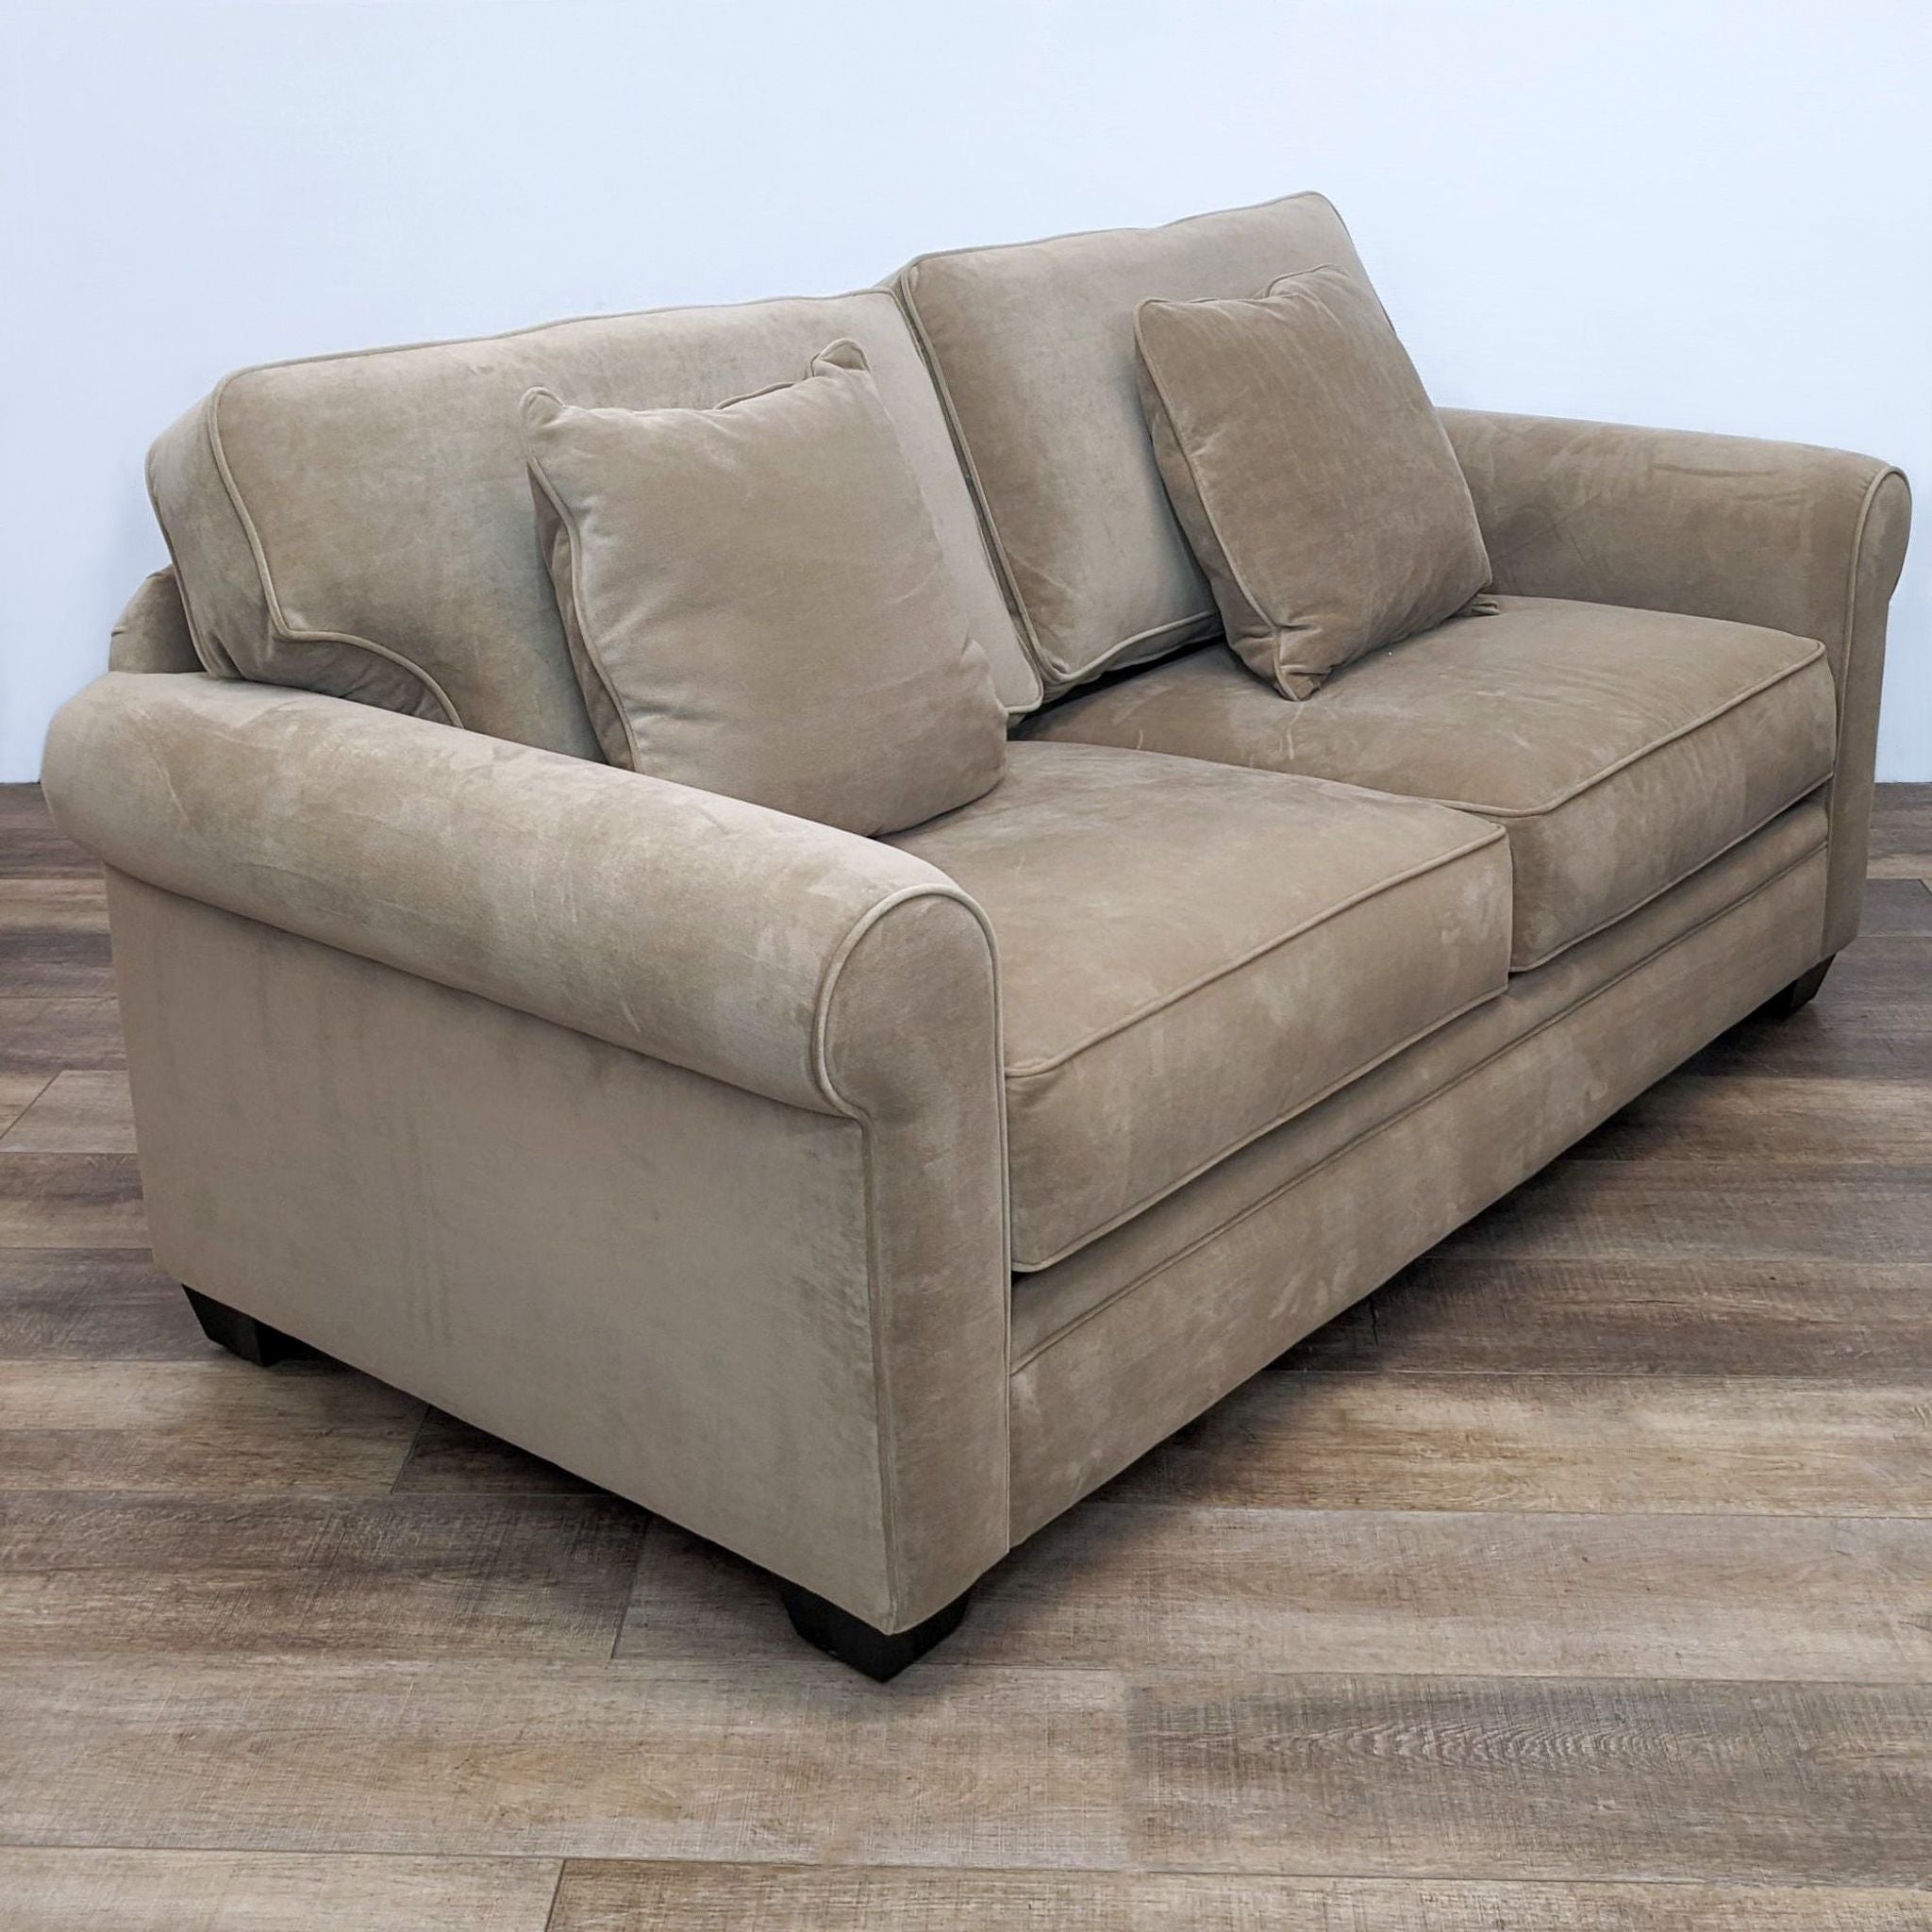 Three-quarter view of a Reperch 3-seat compact sofa with classic design, narrow rolled arms, and dark feet on wooden flooring.